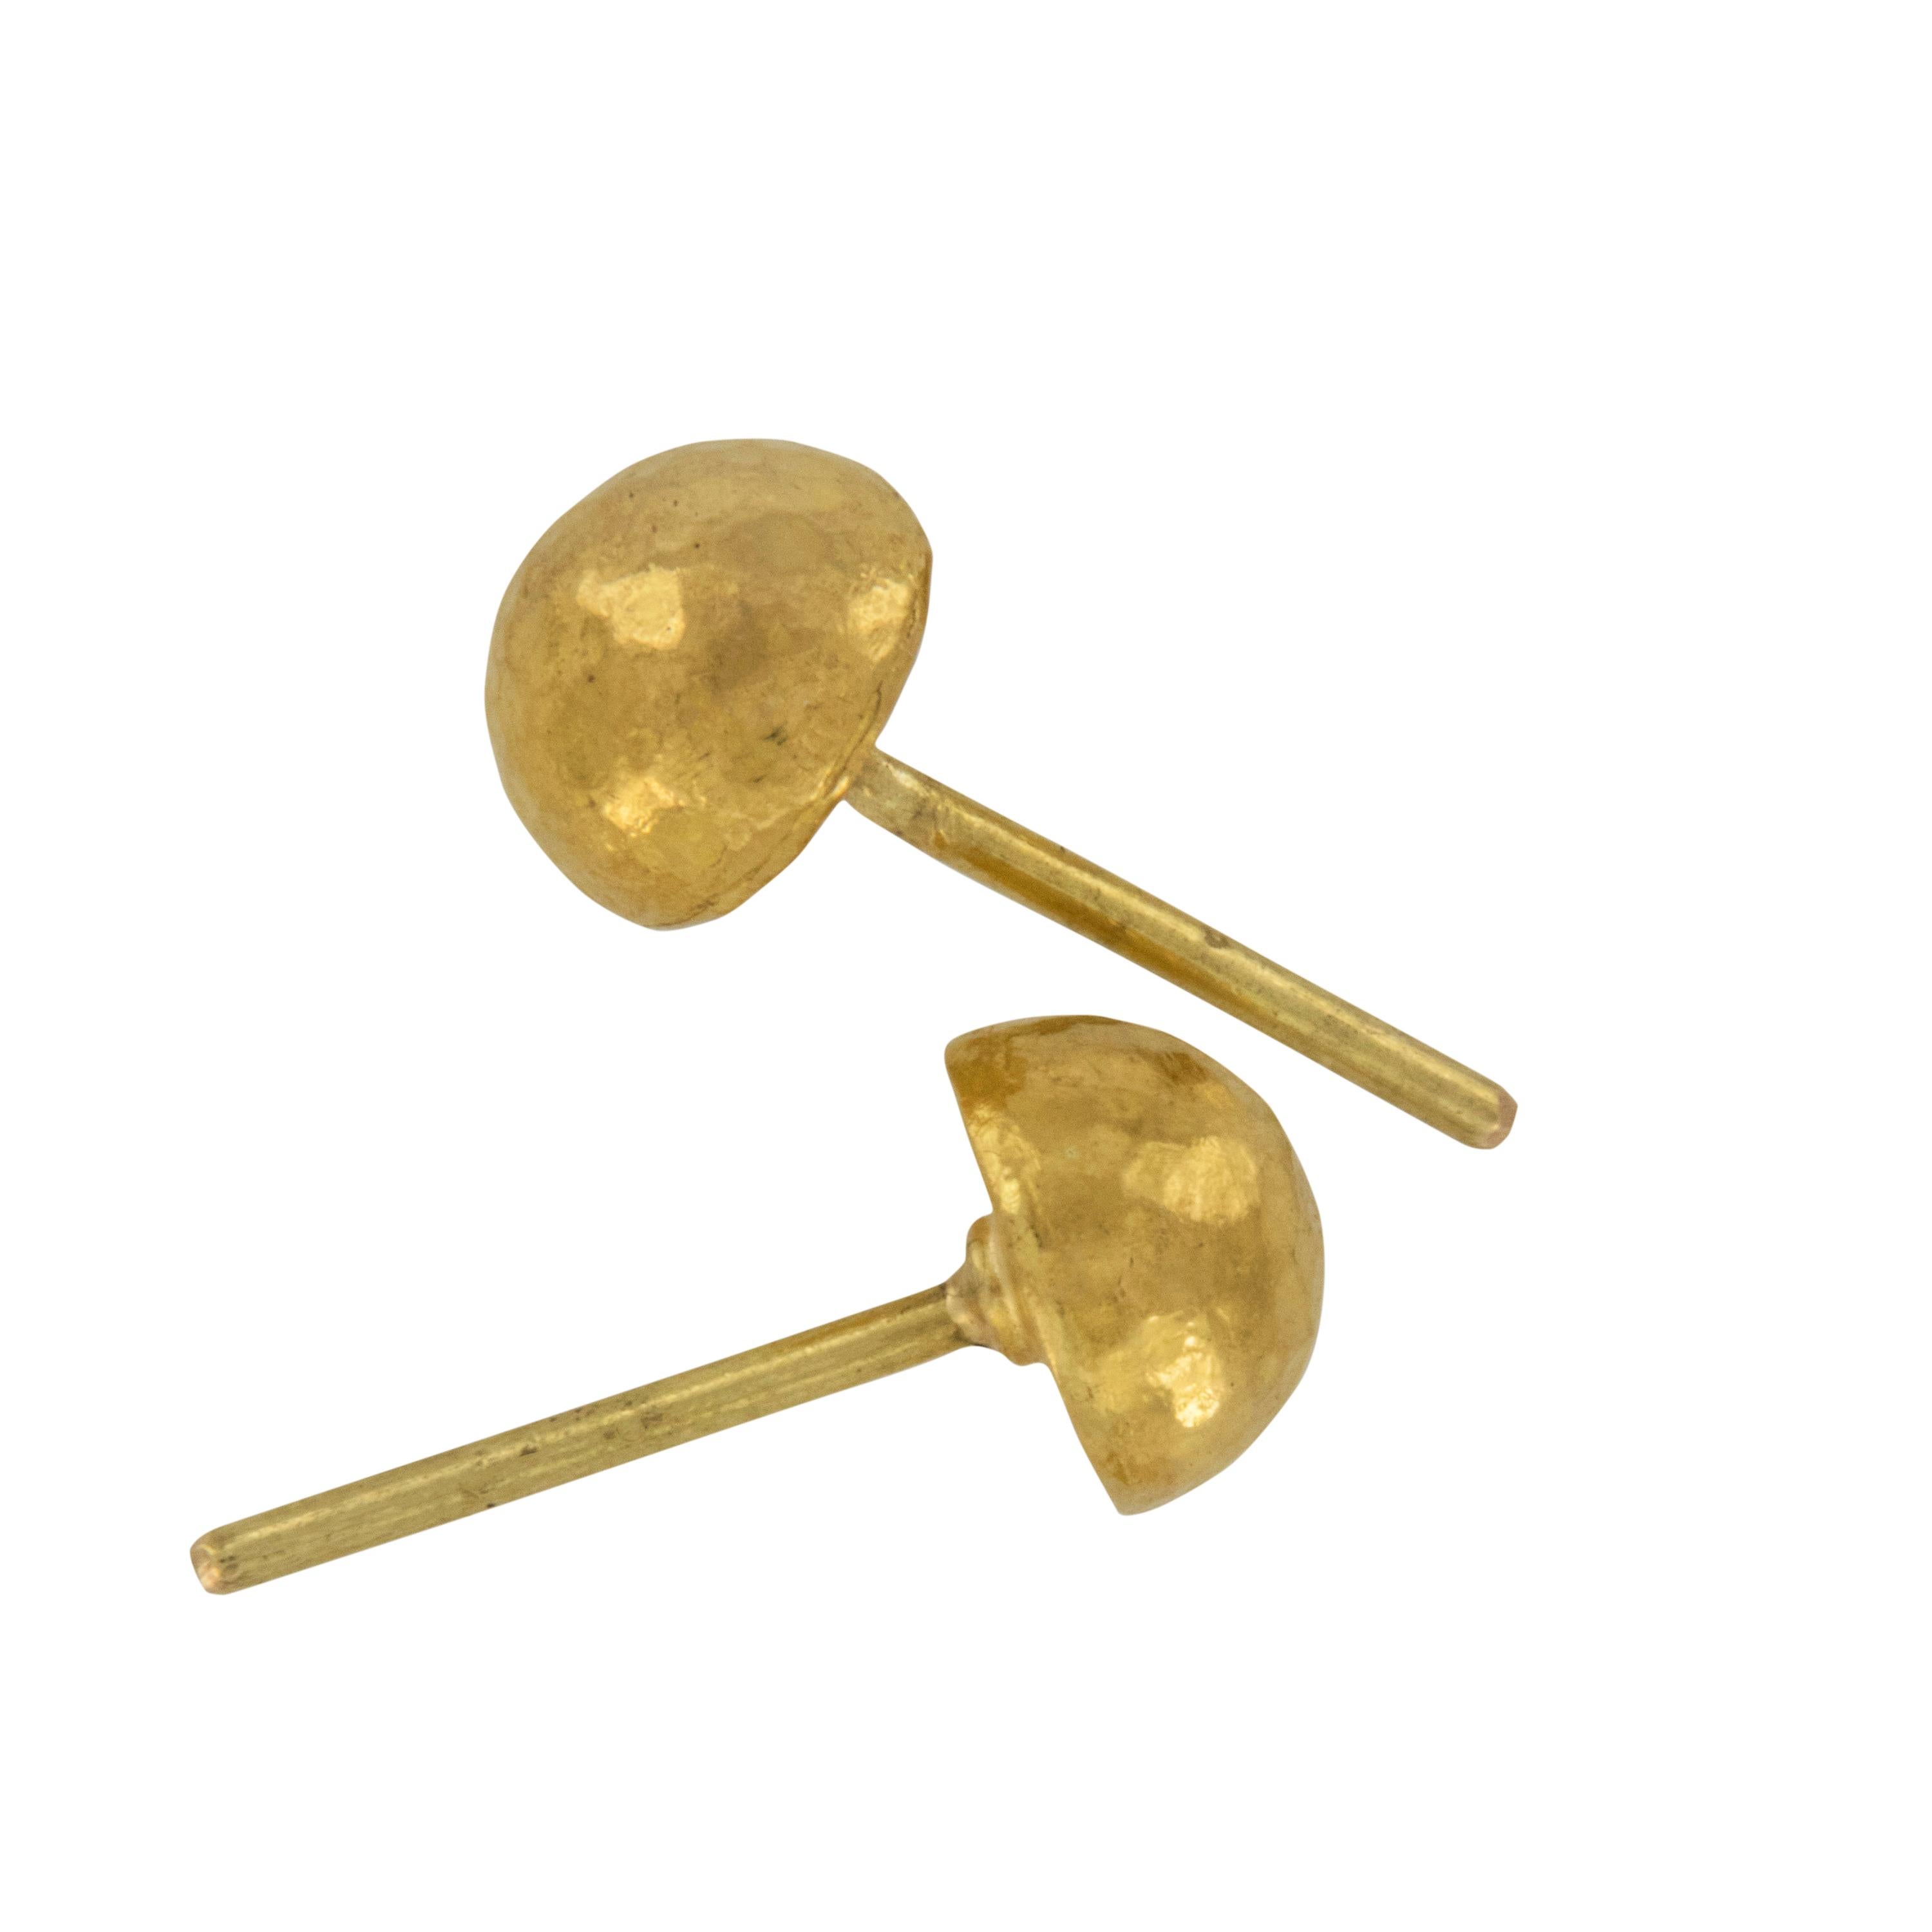 Rarest of all the golds, 24 karat gold is valued by all discerning investors. With it's unmistakable warm yellow color & hammered finish, these round domed earrings will make all you wear with them look richer. Pierced with 18 karat yellow gold